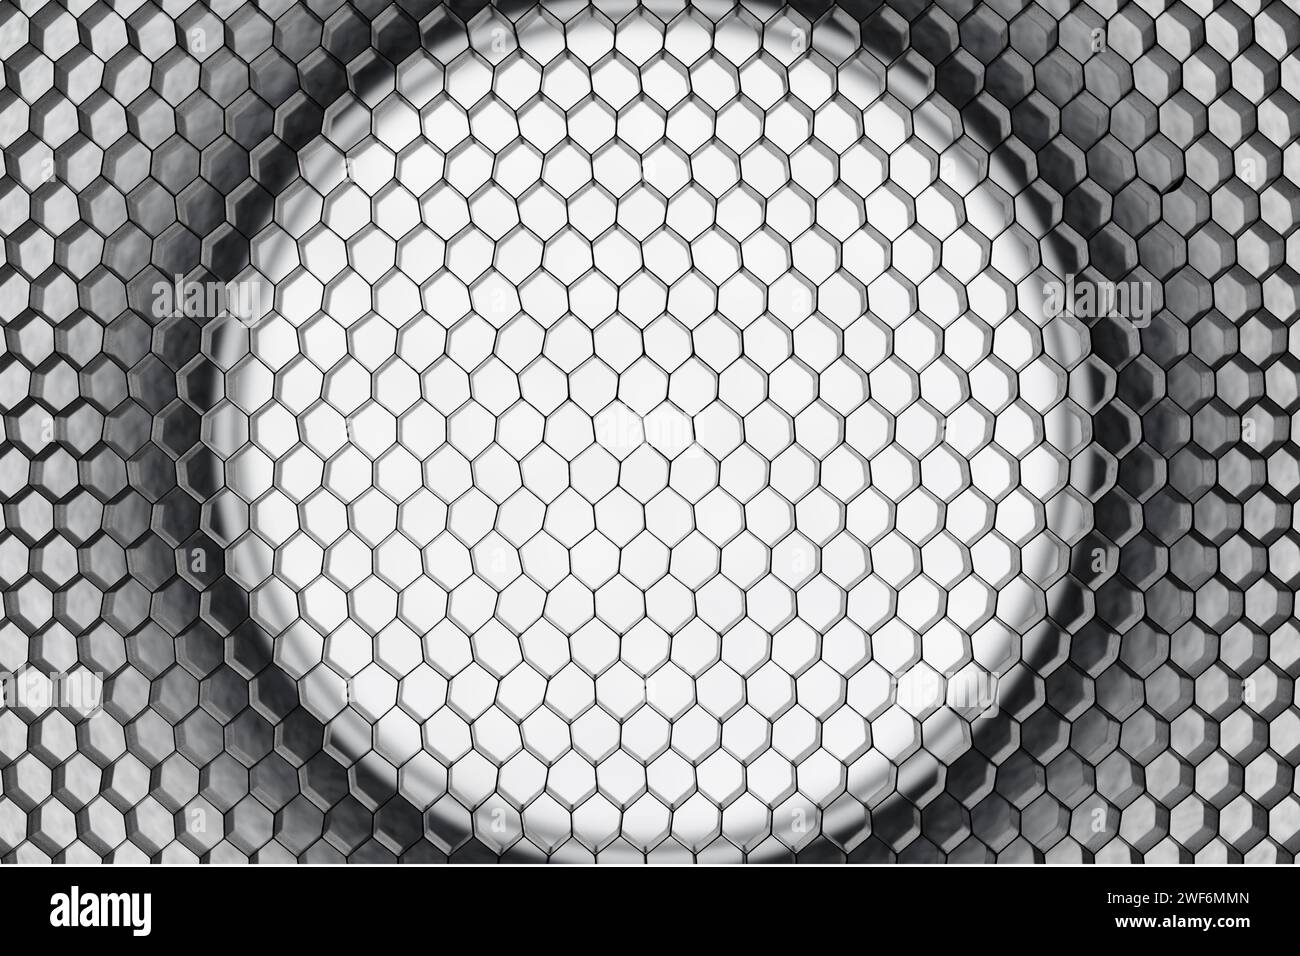 Abstract gray background with honeycomb cells, backlit with a circle in the center. Honeycomb photographic reflector. Stock Photo